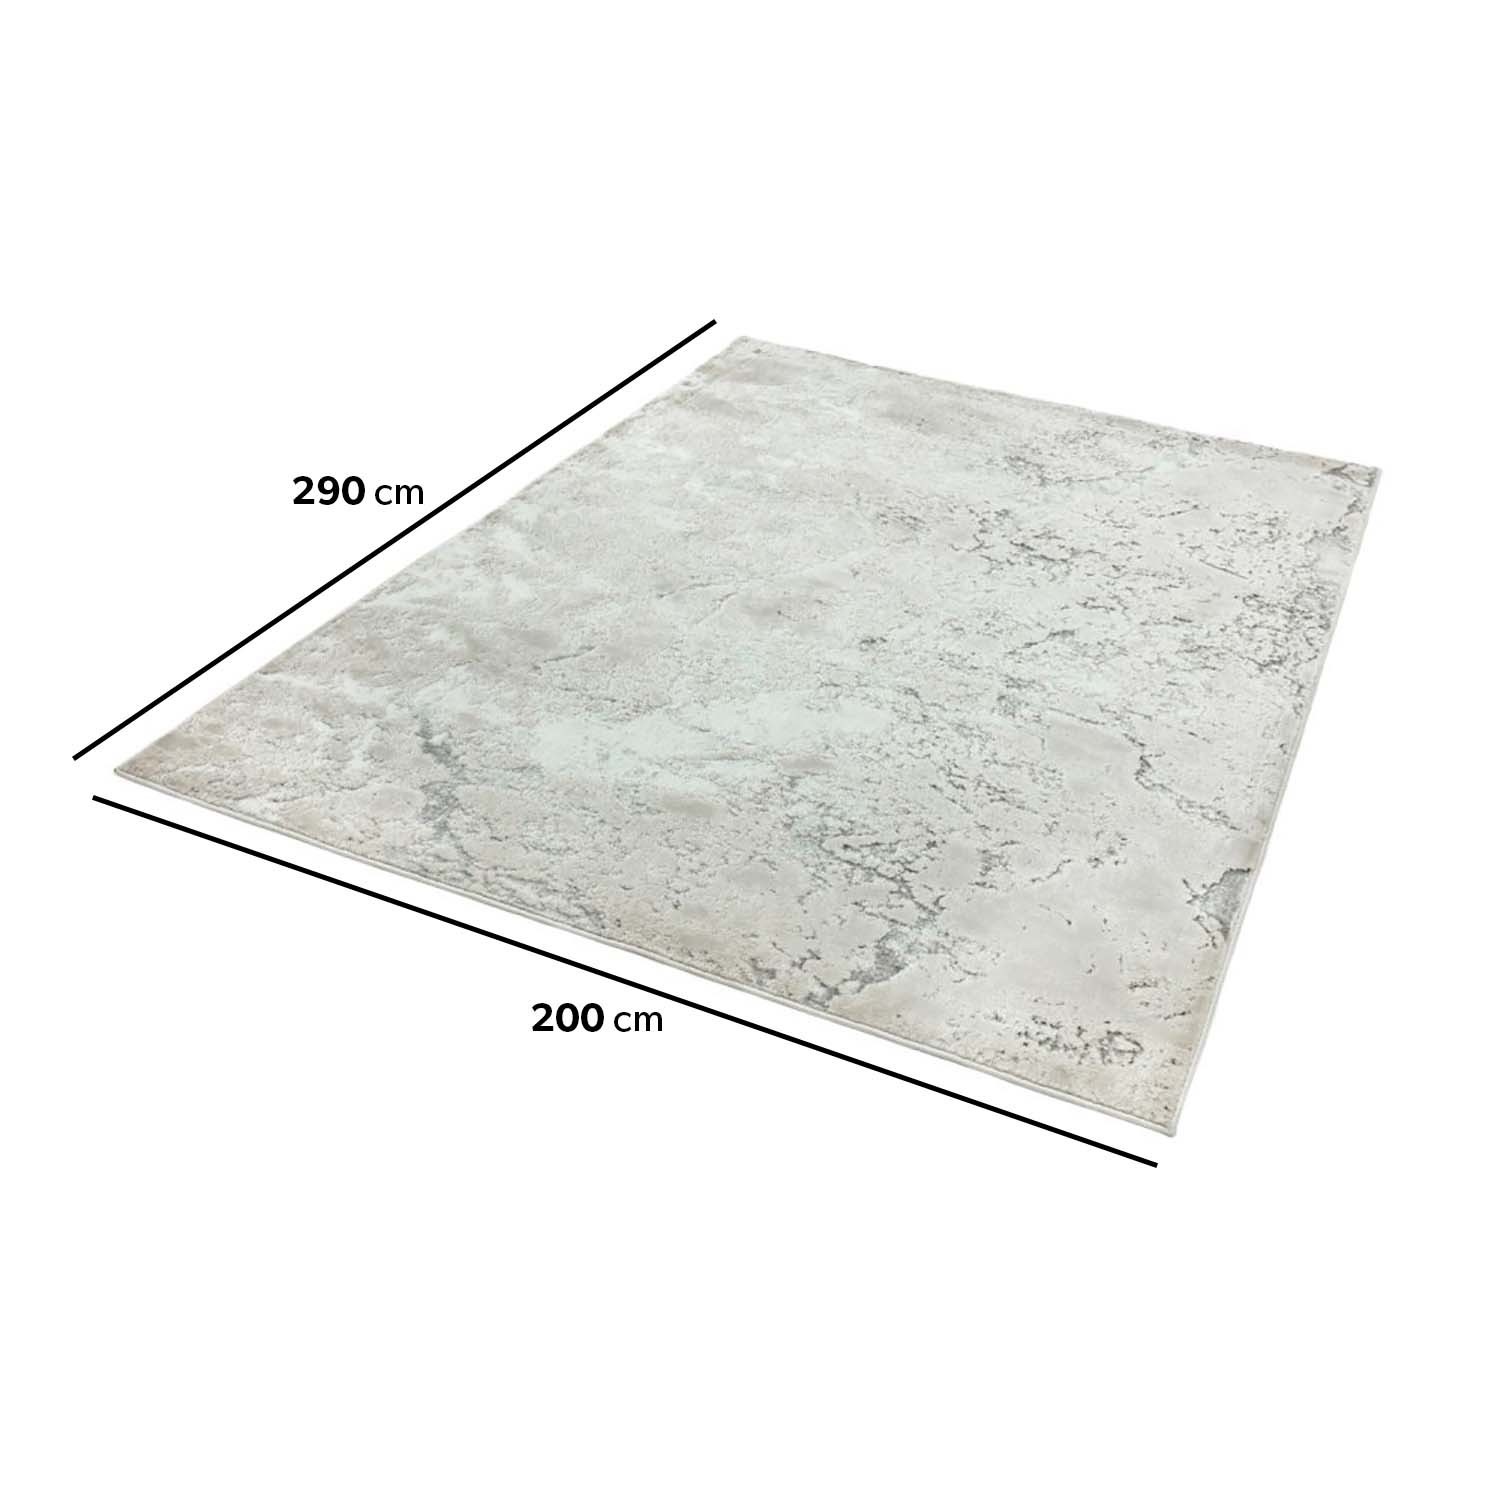 Read more about Large silver marble effect rug 200x290 cm aurora